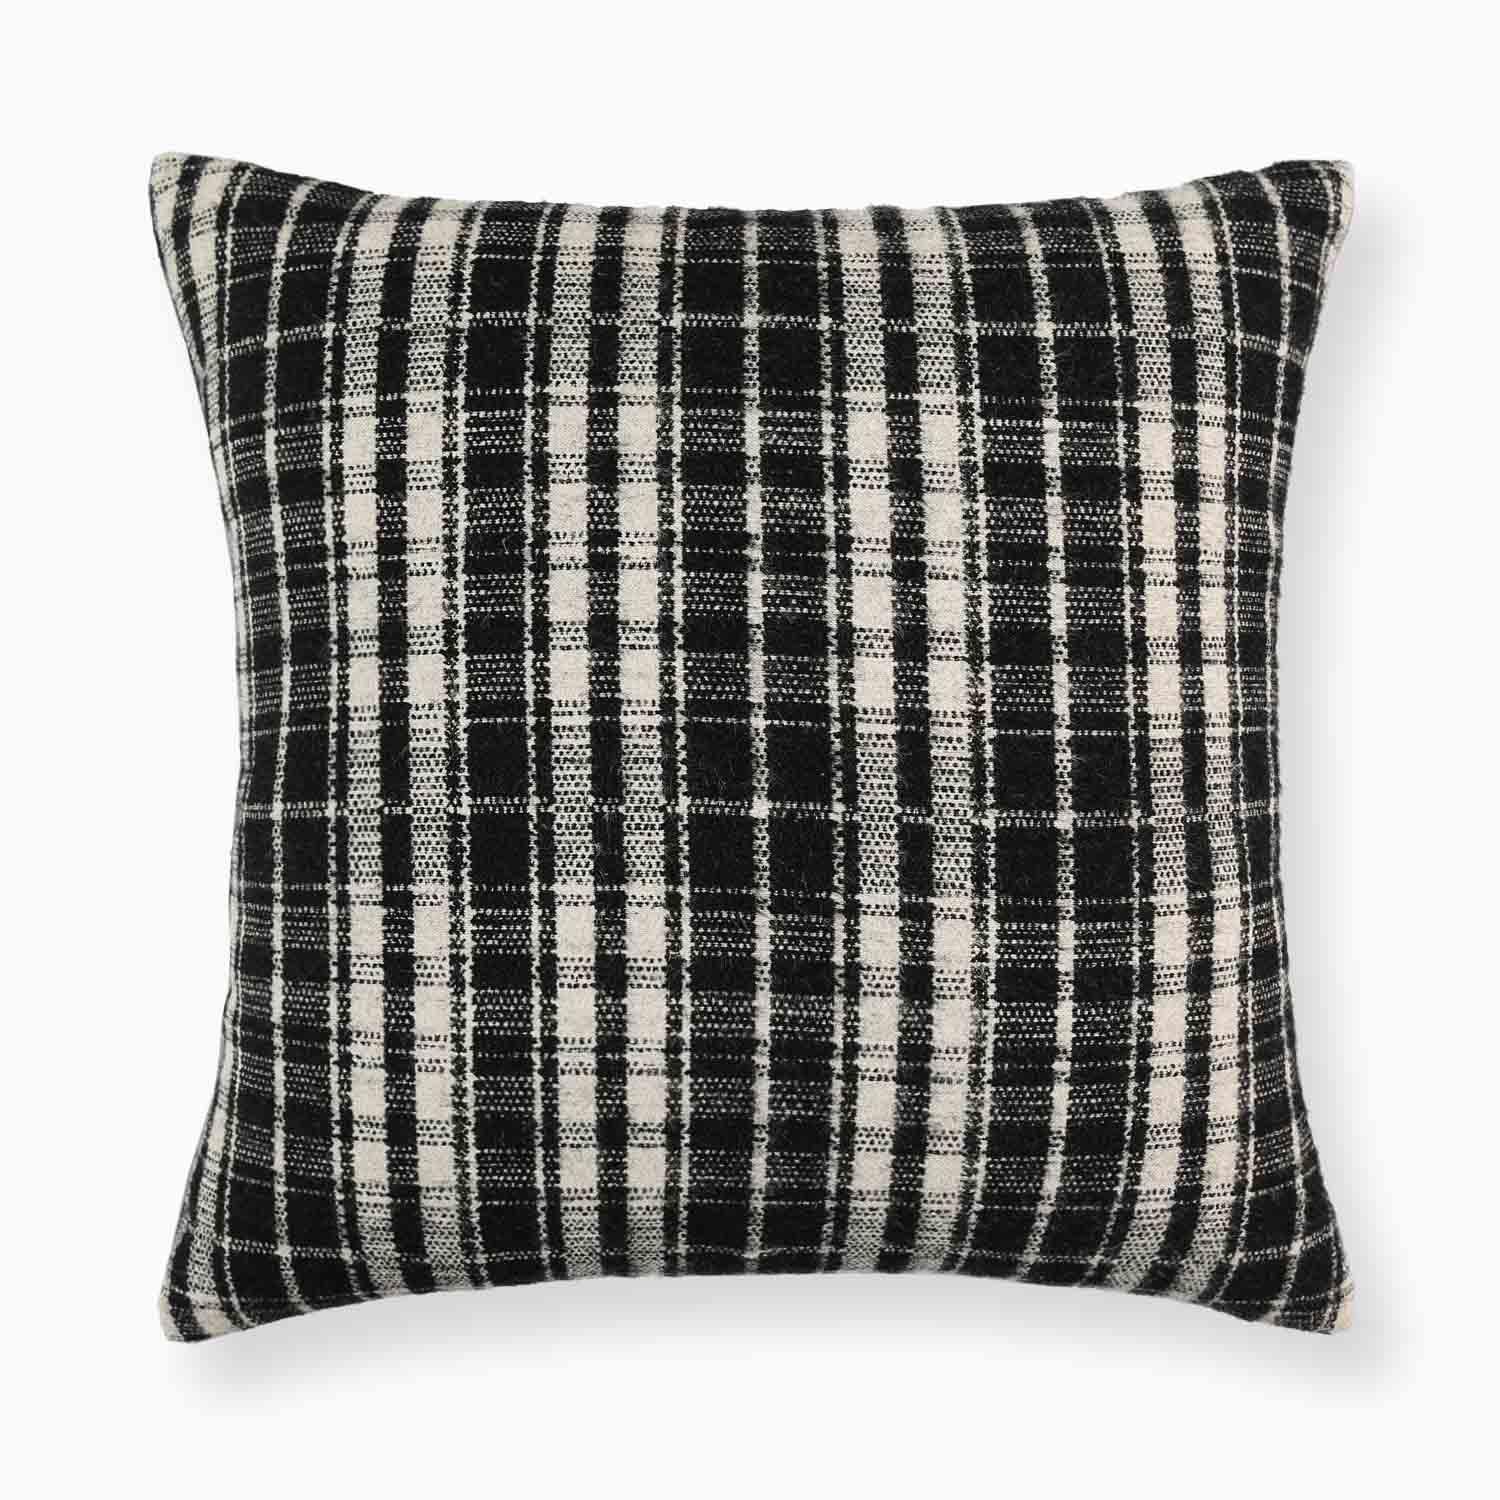 Marina Mink Faux Fur Patterned Pillow Cover-